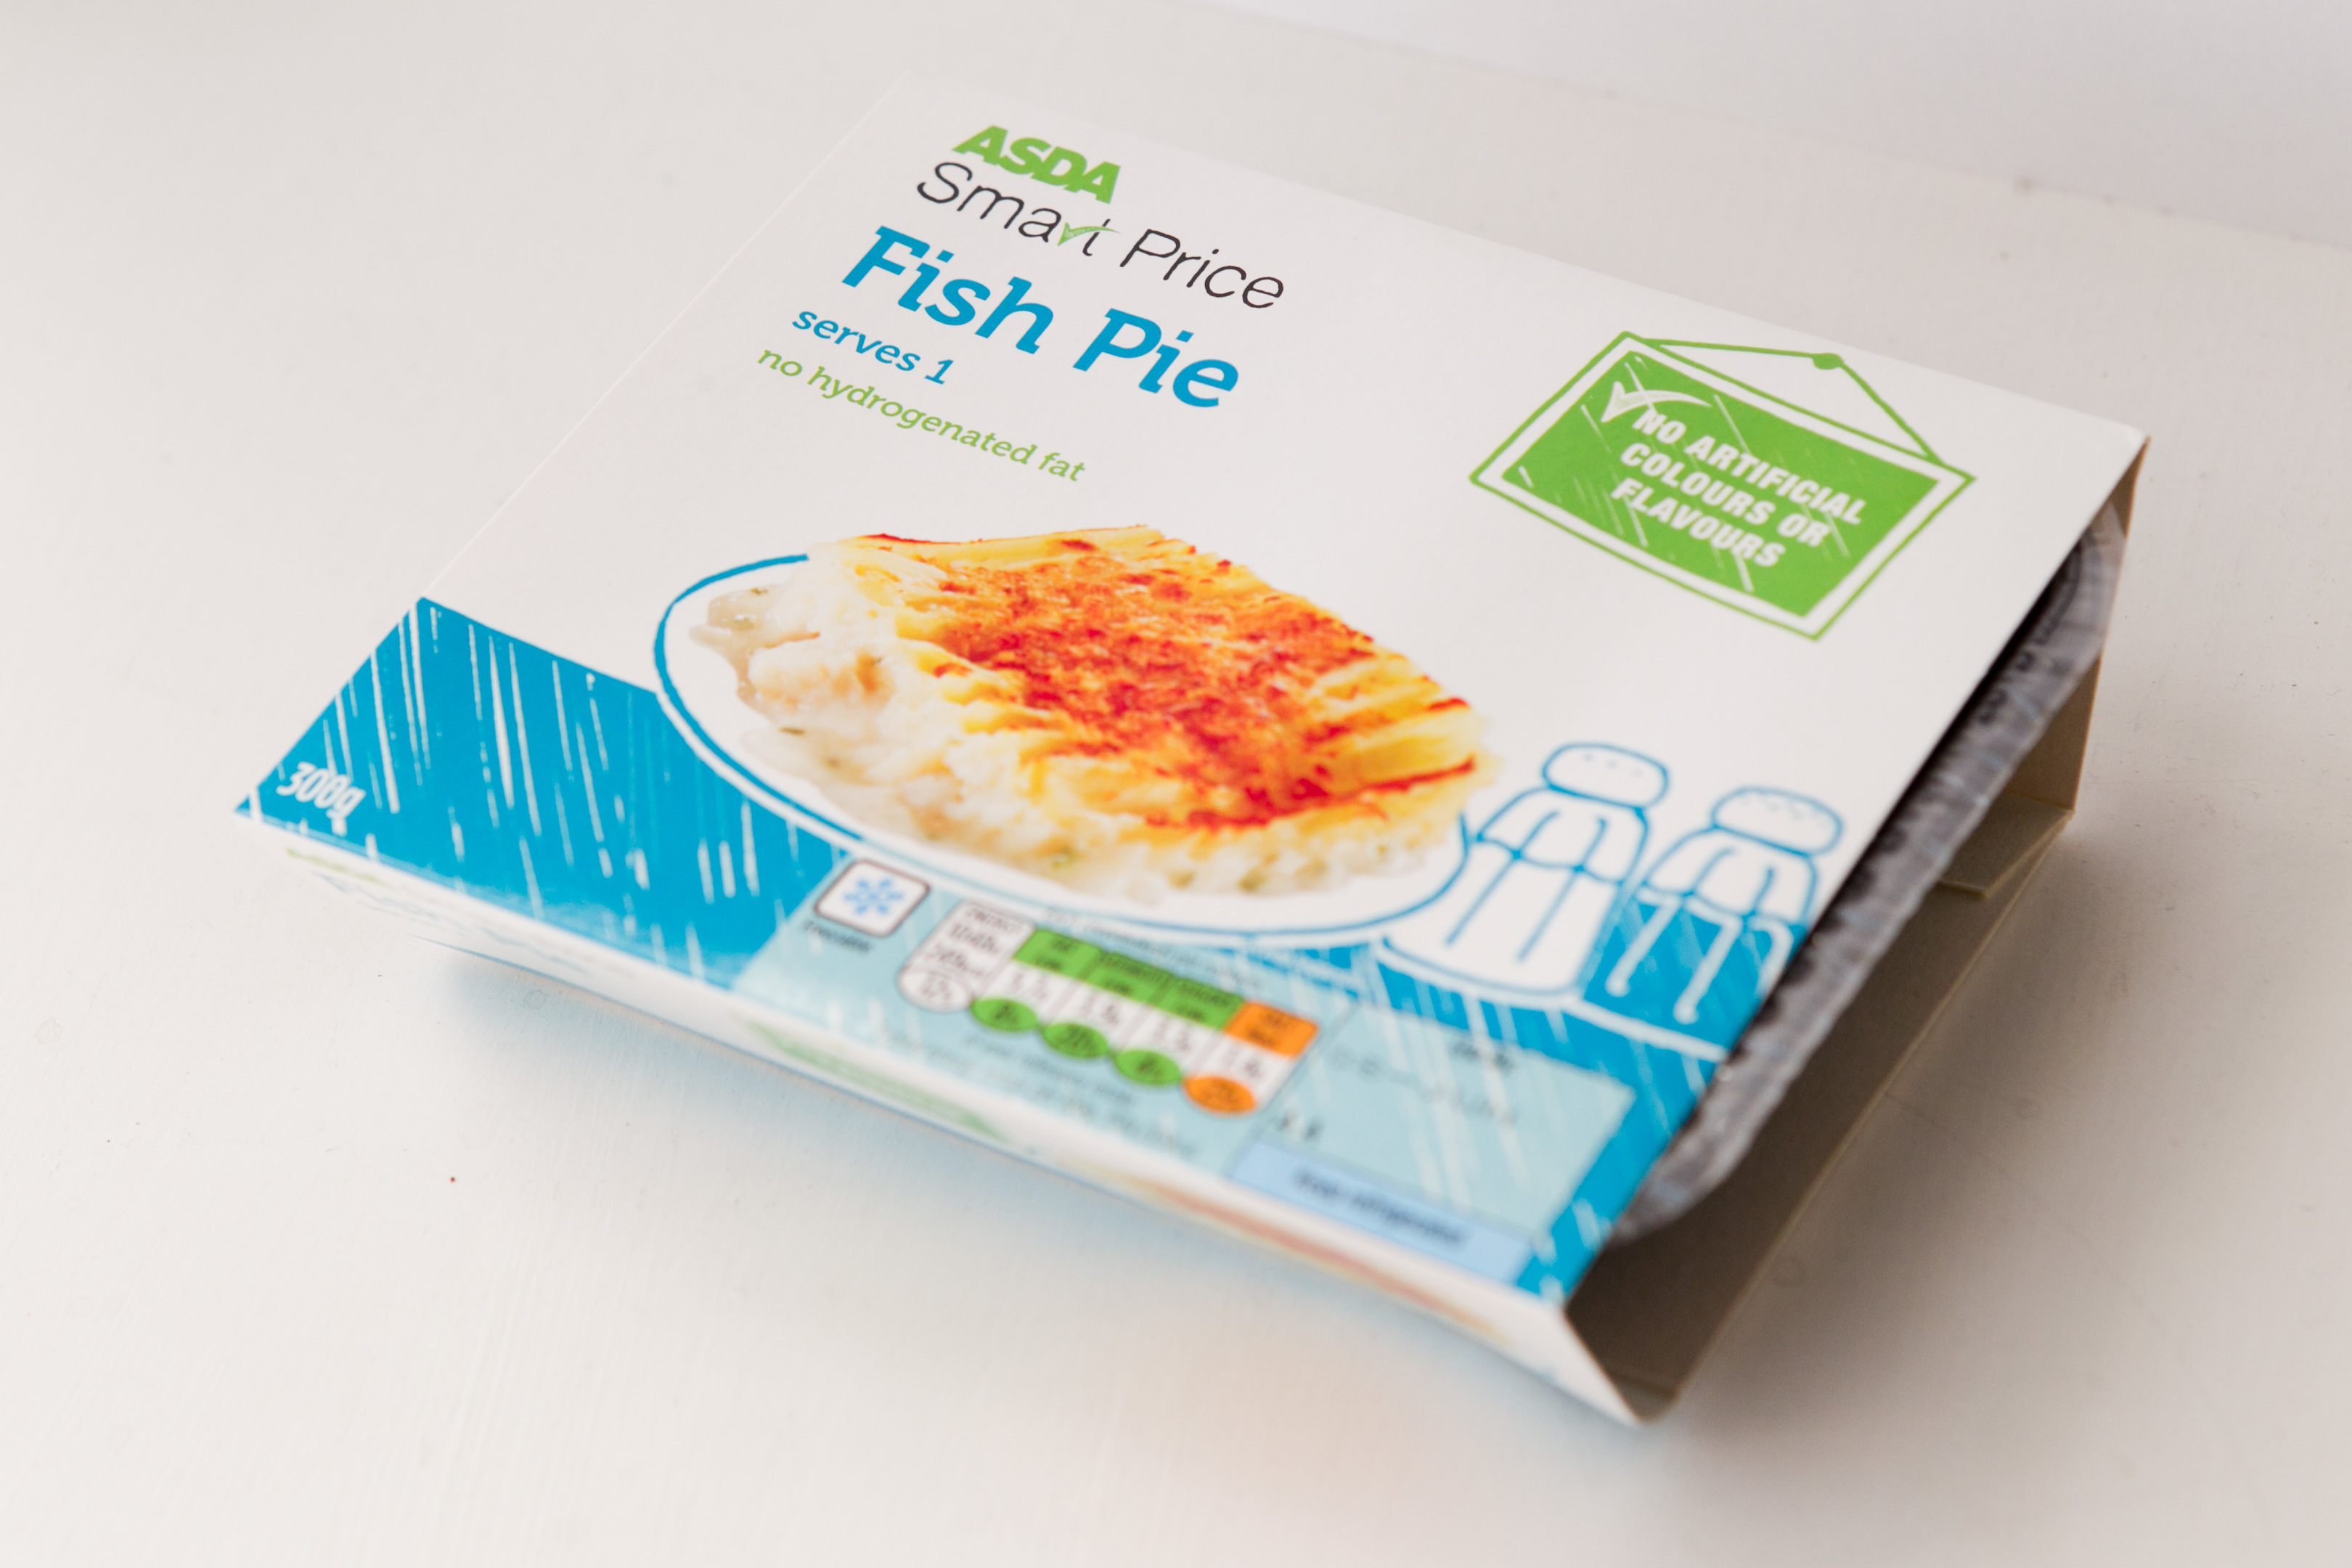 2/6/2016. Sunday Post. Andrew Cawley. Product shots of ready meals: Asda Fish Pie.